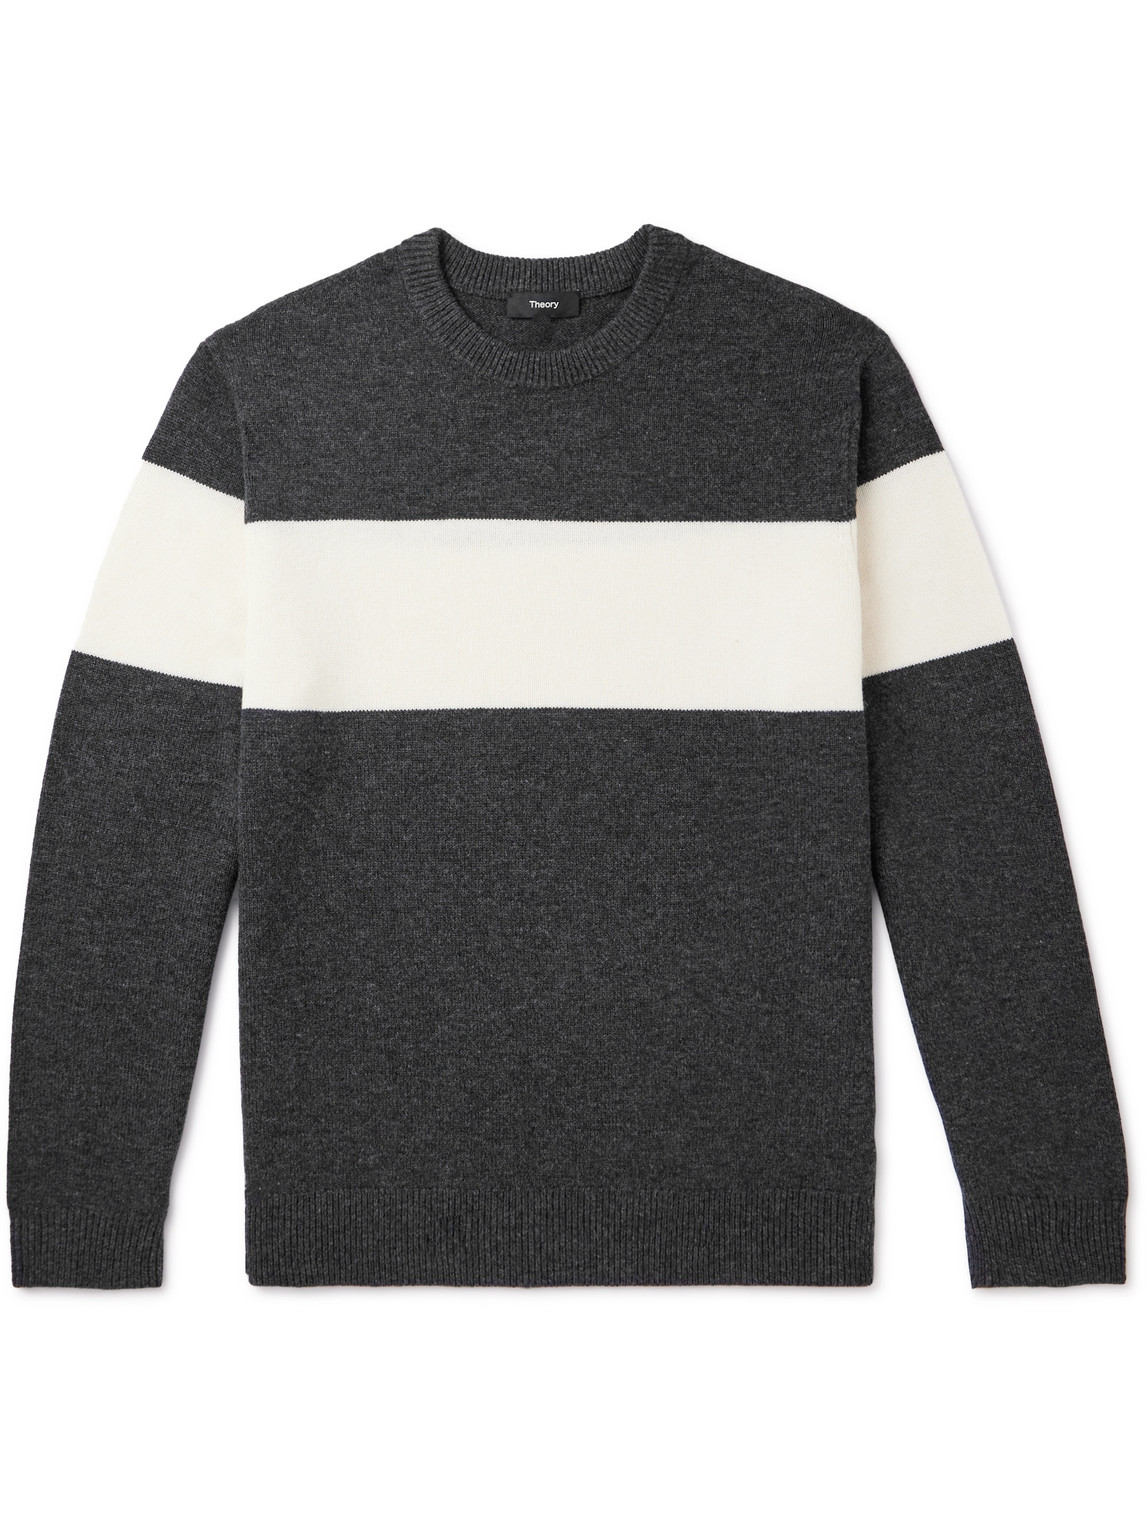 THEORY HILLES STRIPED WOOL-BLEND SWEATER